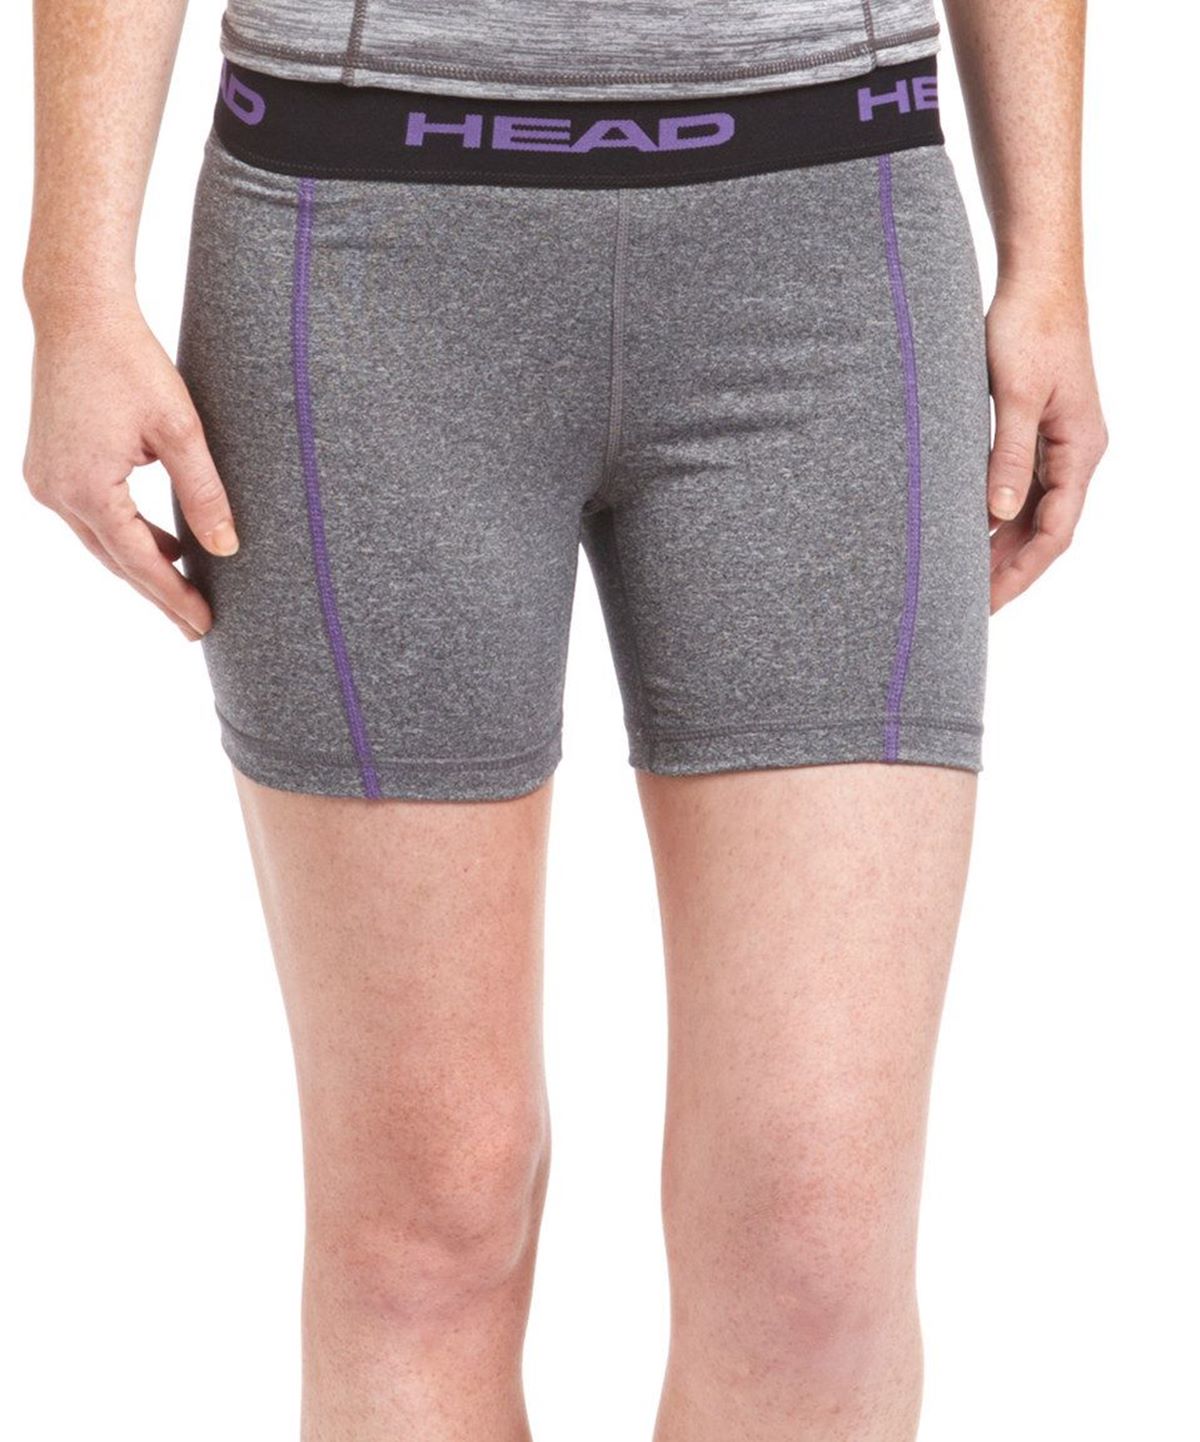 10 Incredible Head Compression Shorts For 2023